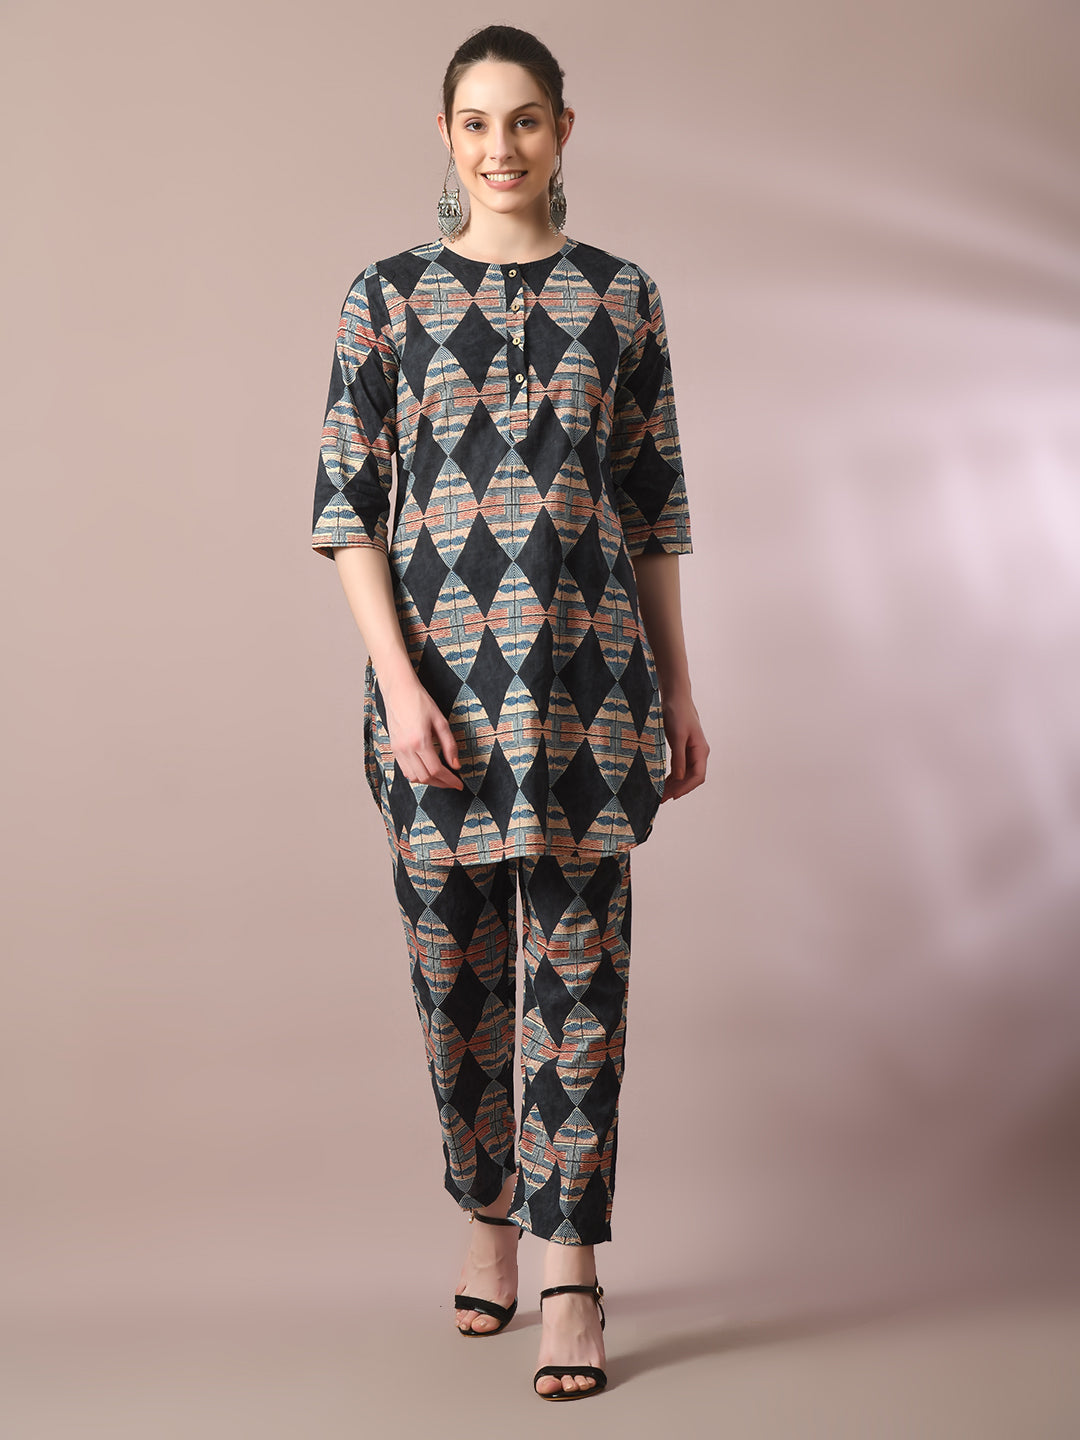 Women's  Multi Printed Cotton Round Neck Party Tunic With Trousers Co-Ord Set  - Myshka